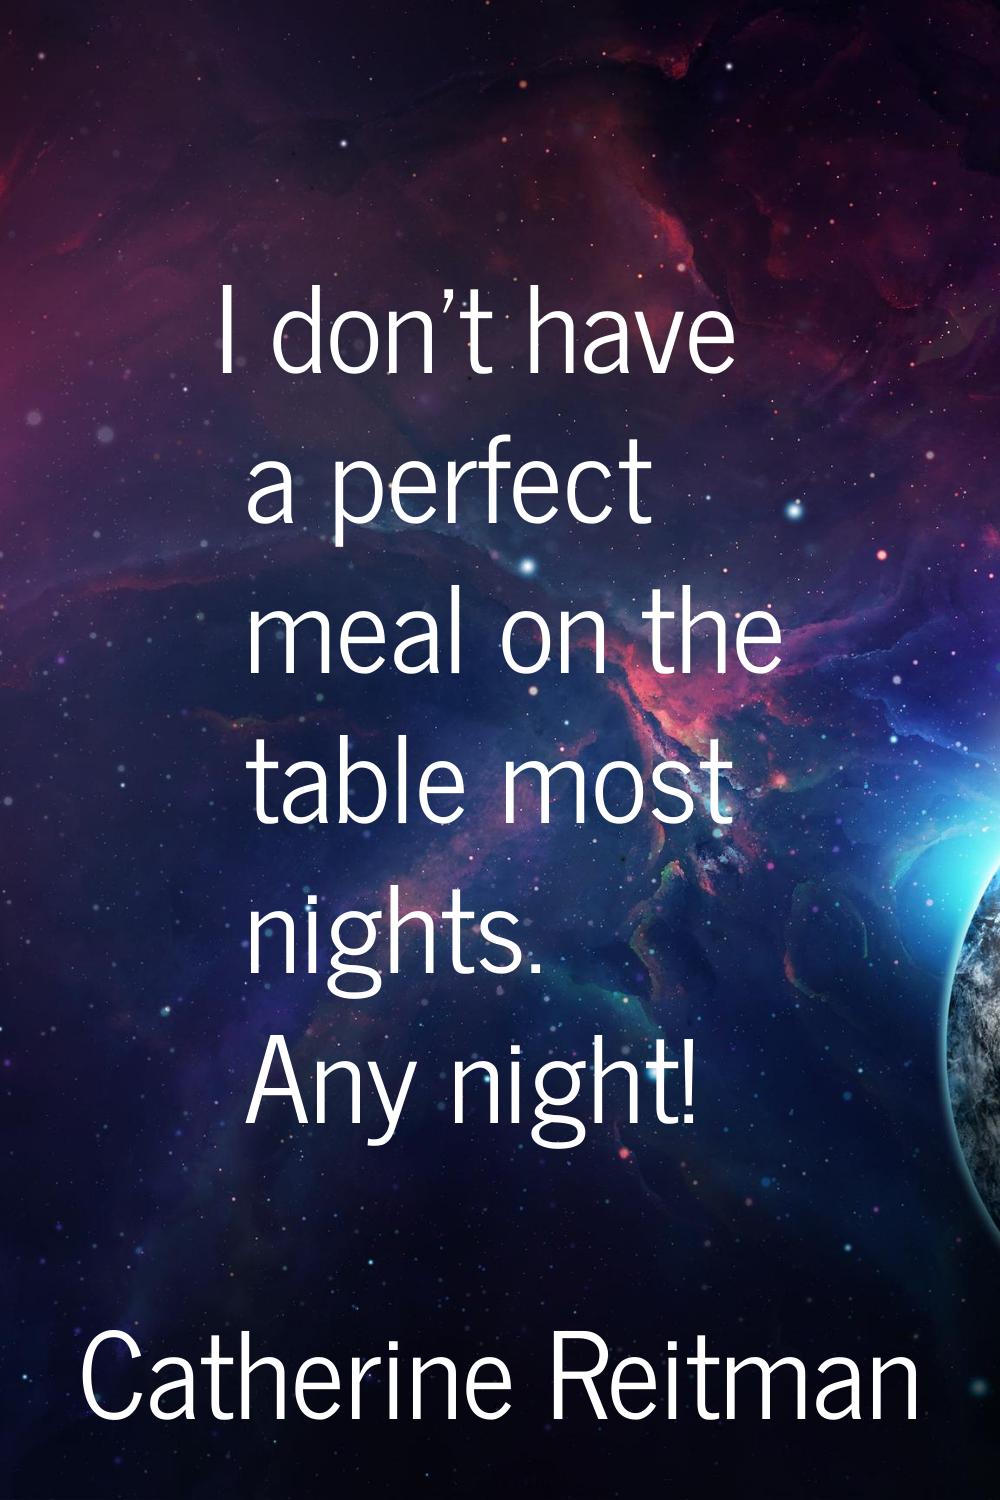 I don't have a perfect meal on the table most nights. Any night!